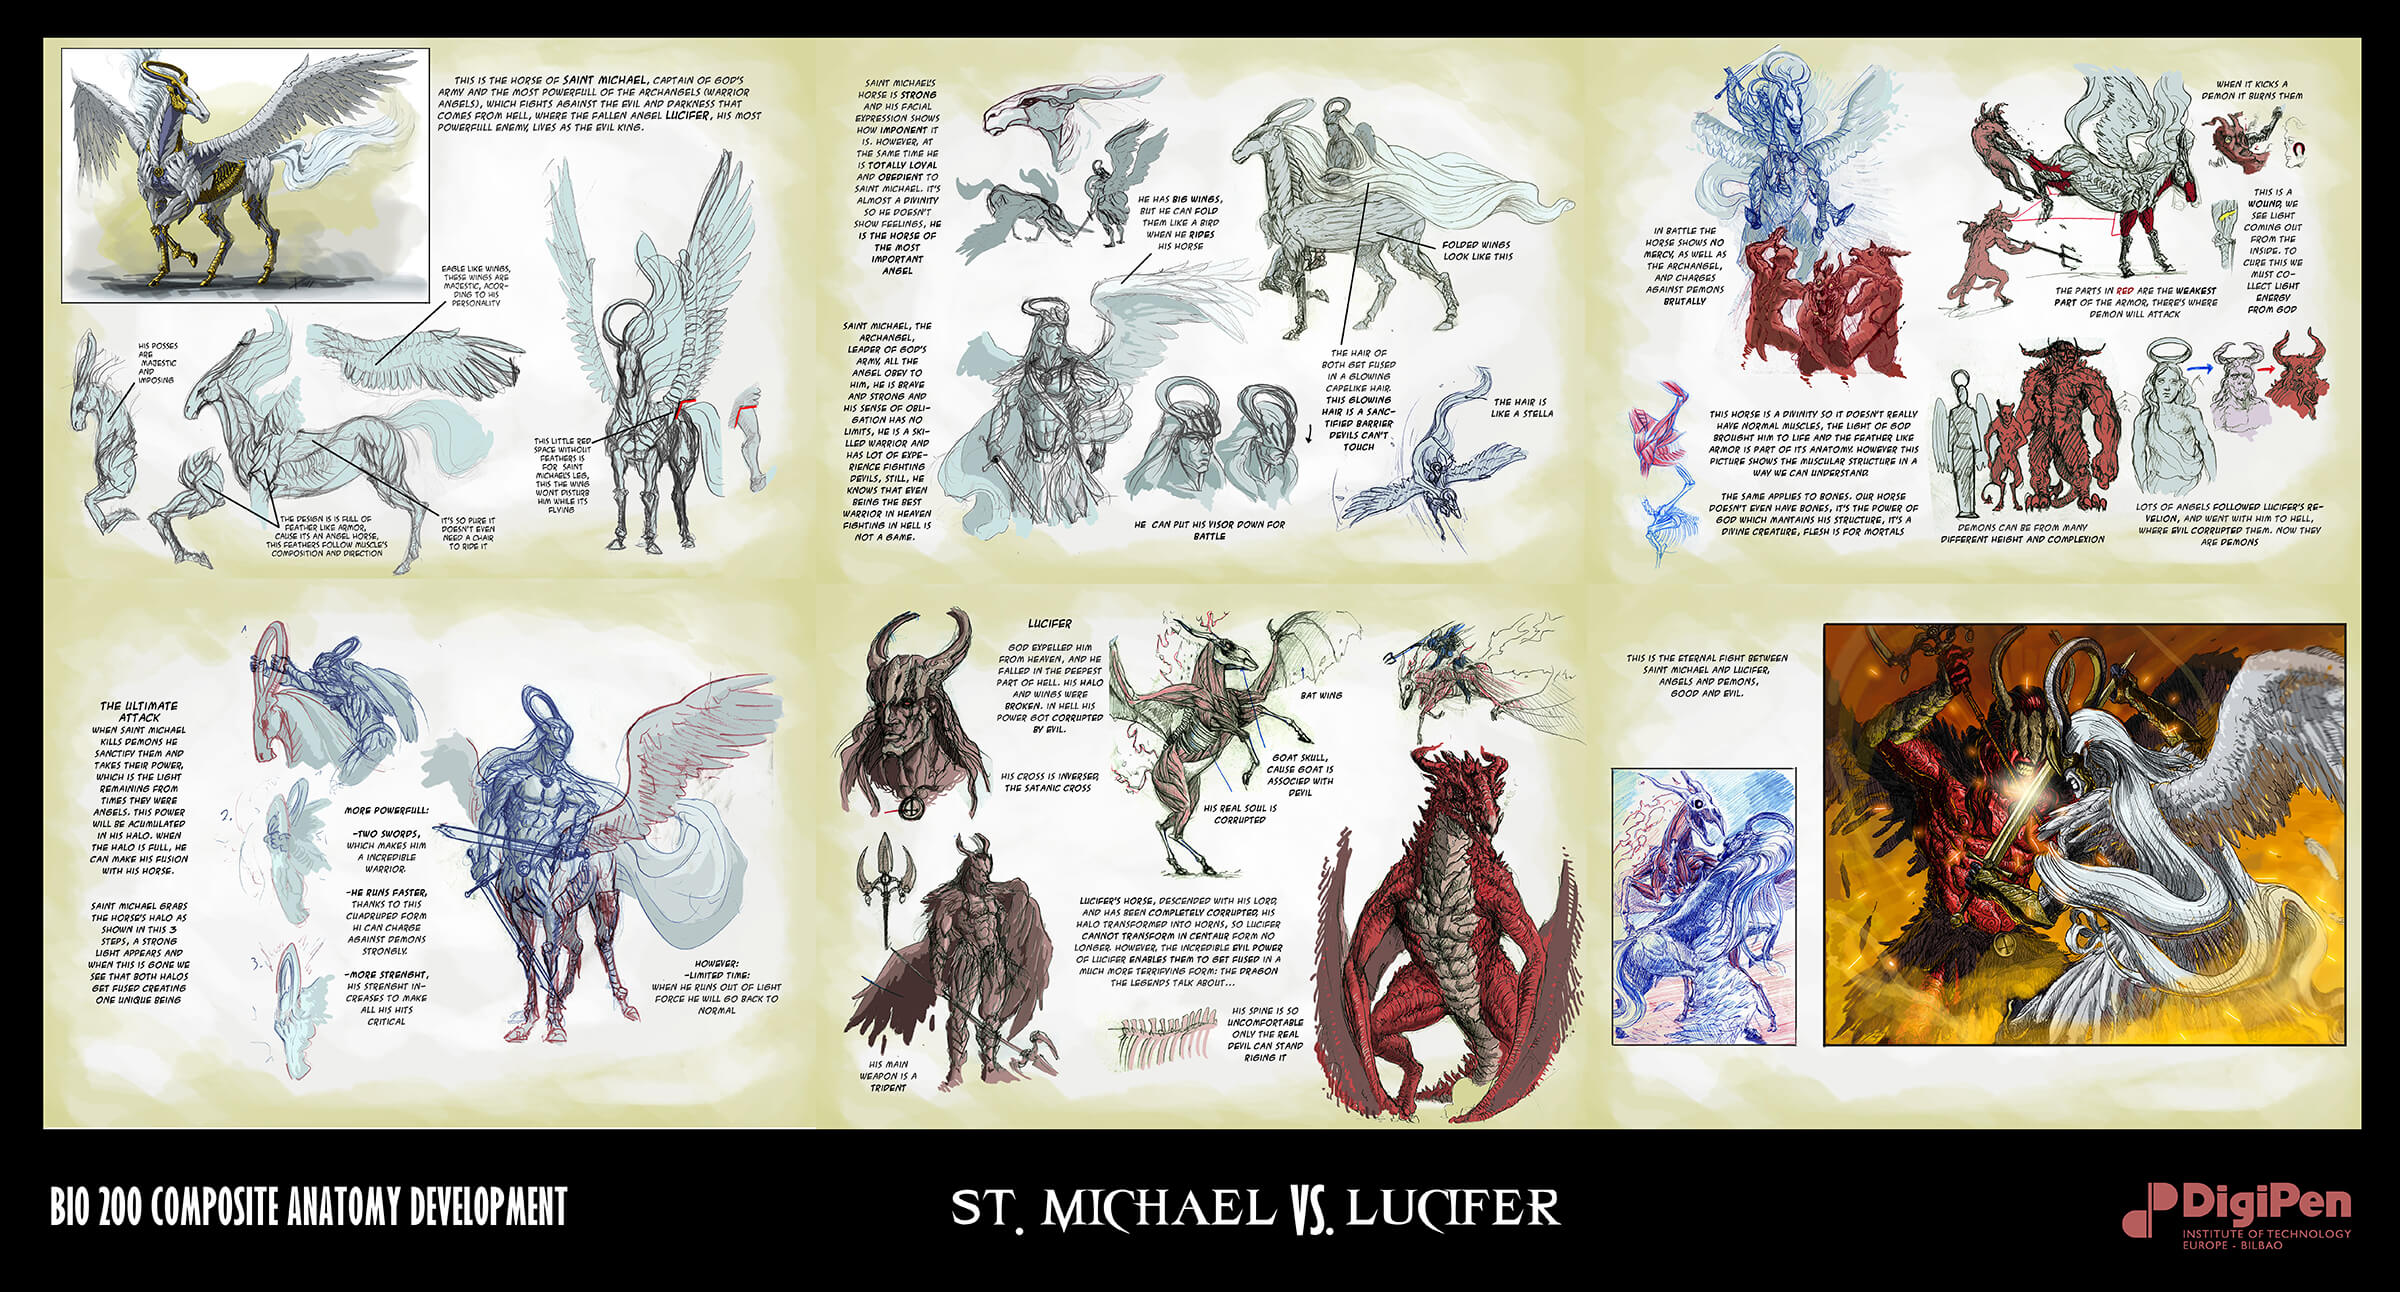 Designs and descriptions for an angelic character on horseback and a demonic figure on a dragon as they do battle.